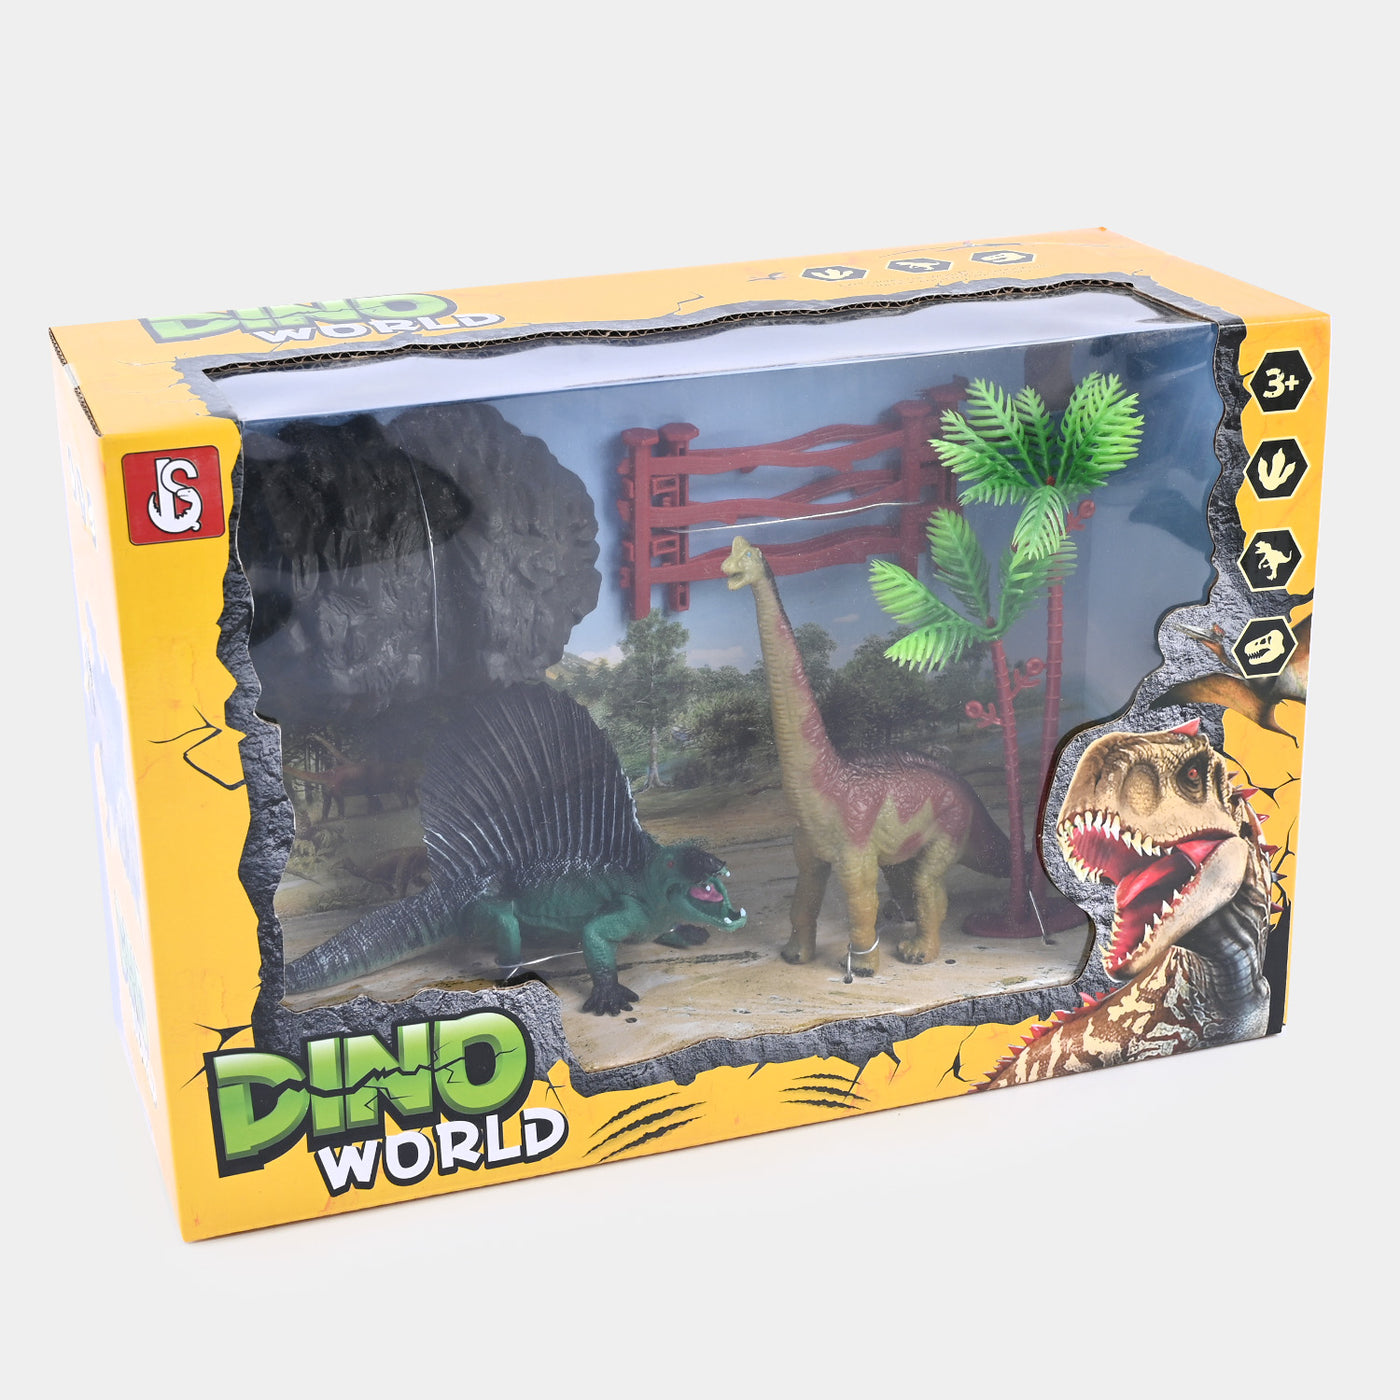 Dinosaurs With Stone Fence For Kids